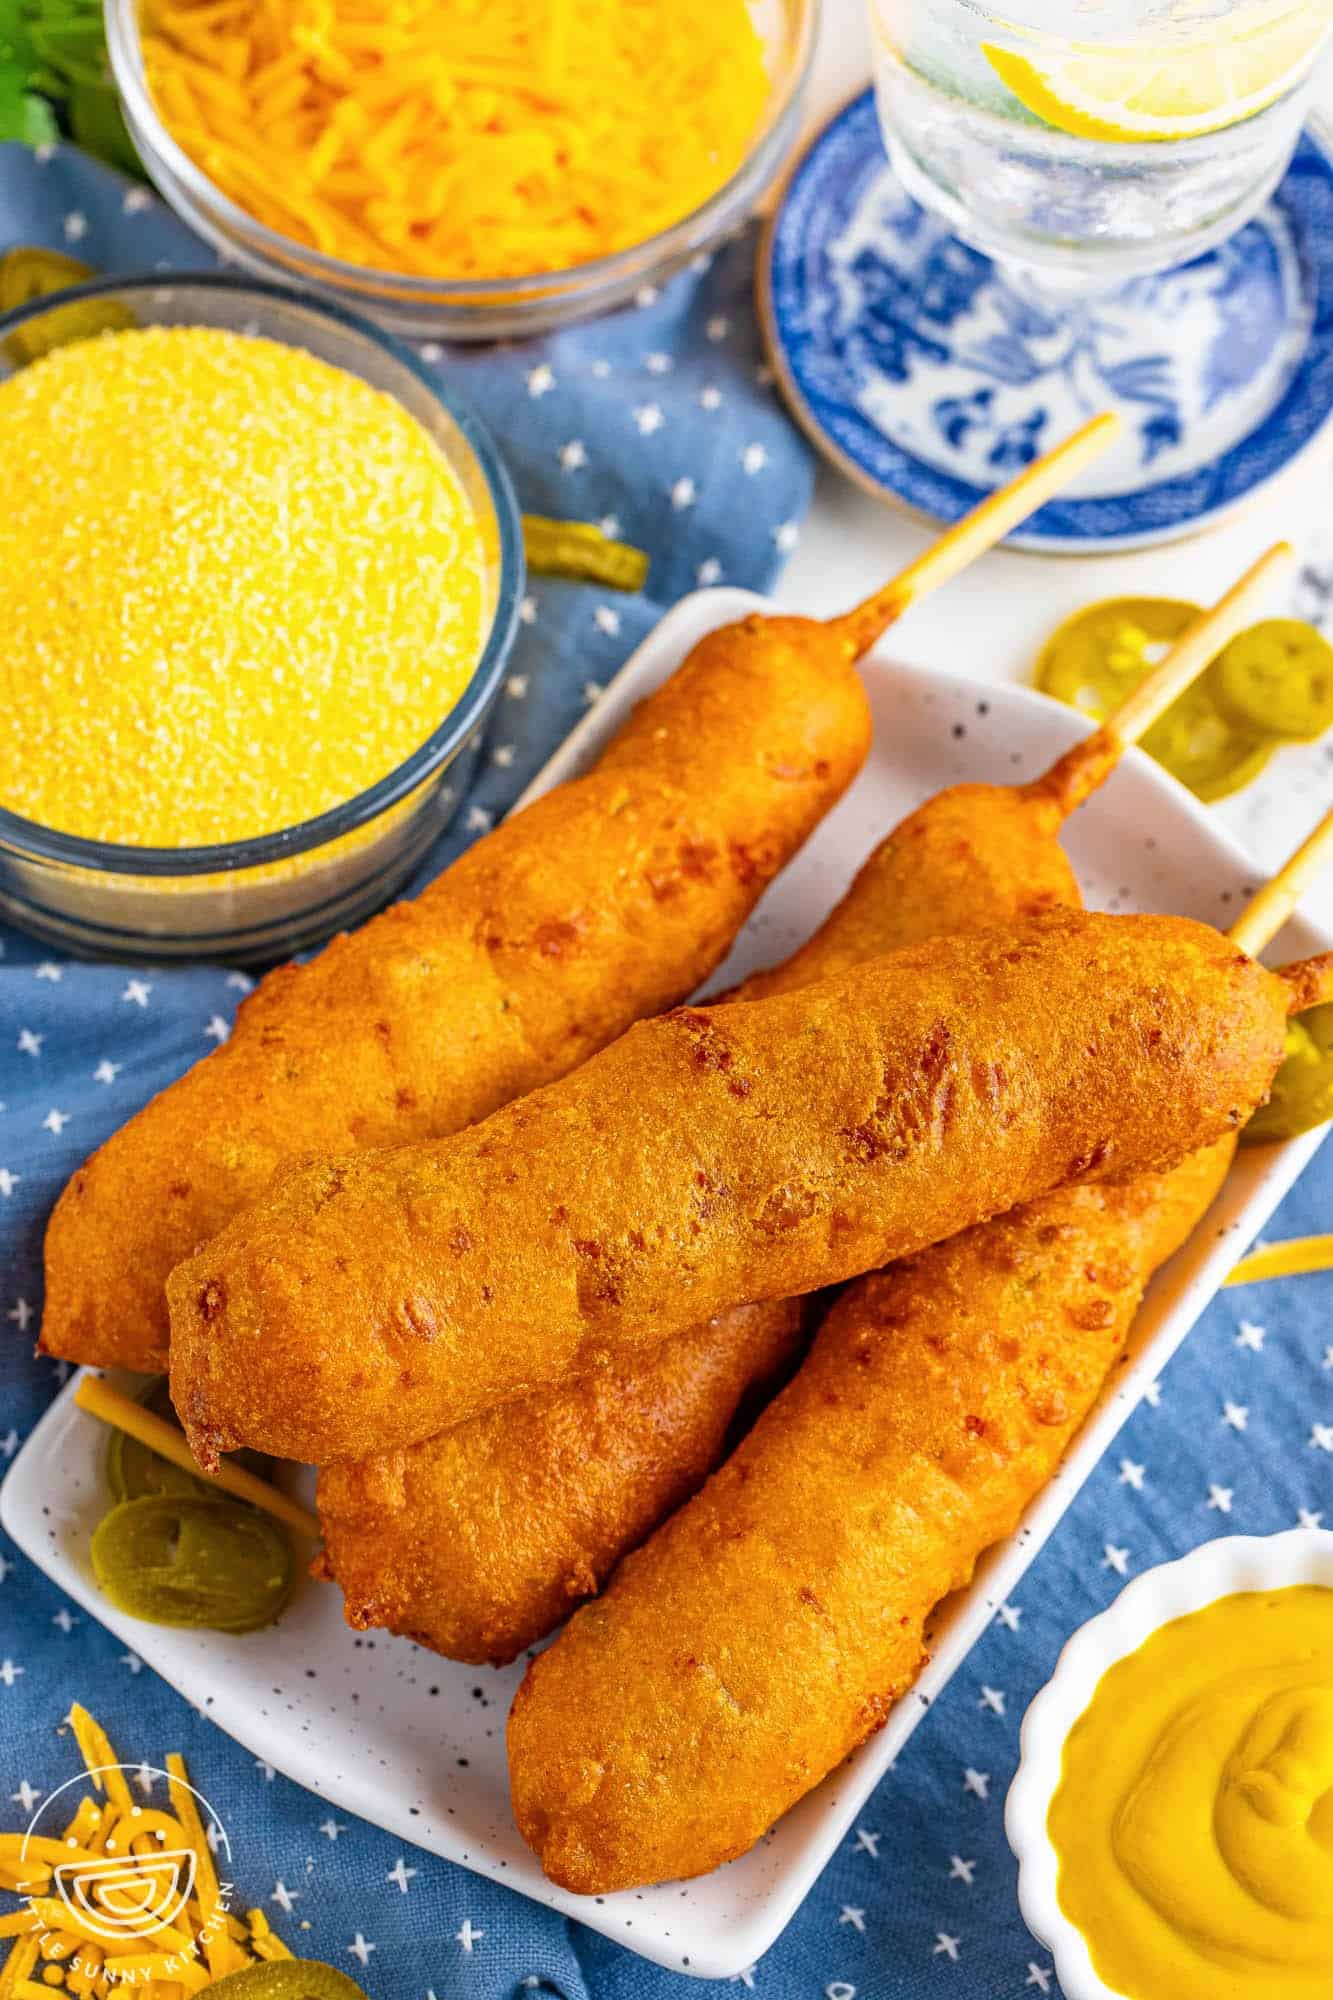 a square plate holding four hand-dipped corn dogs with a side of yellow corn meal. In the background is shredded cheddar cheese and pickled jalapenos